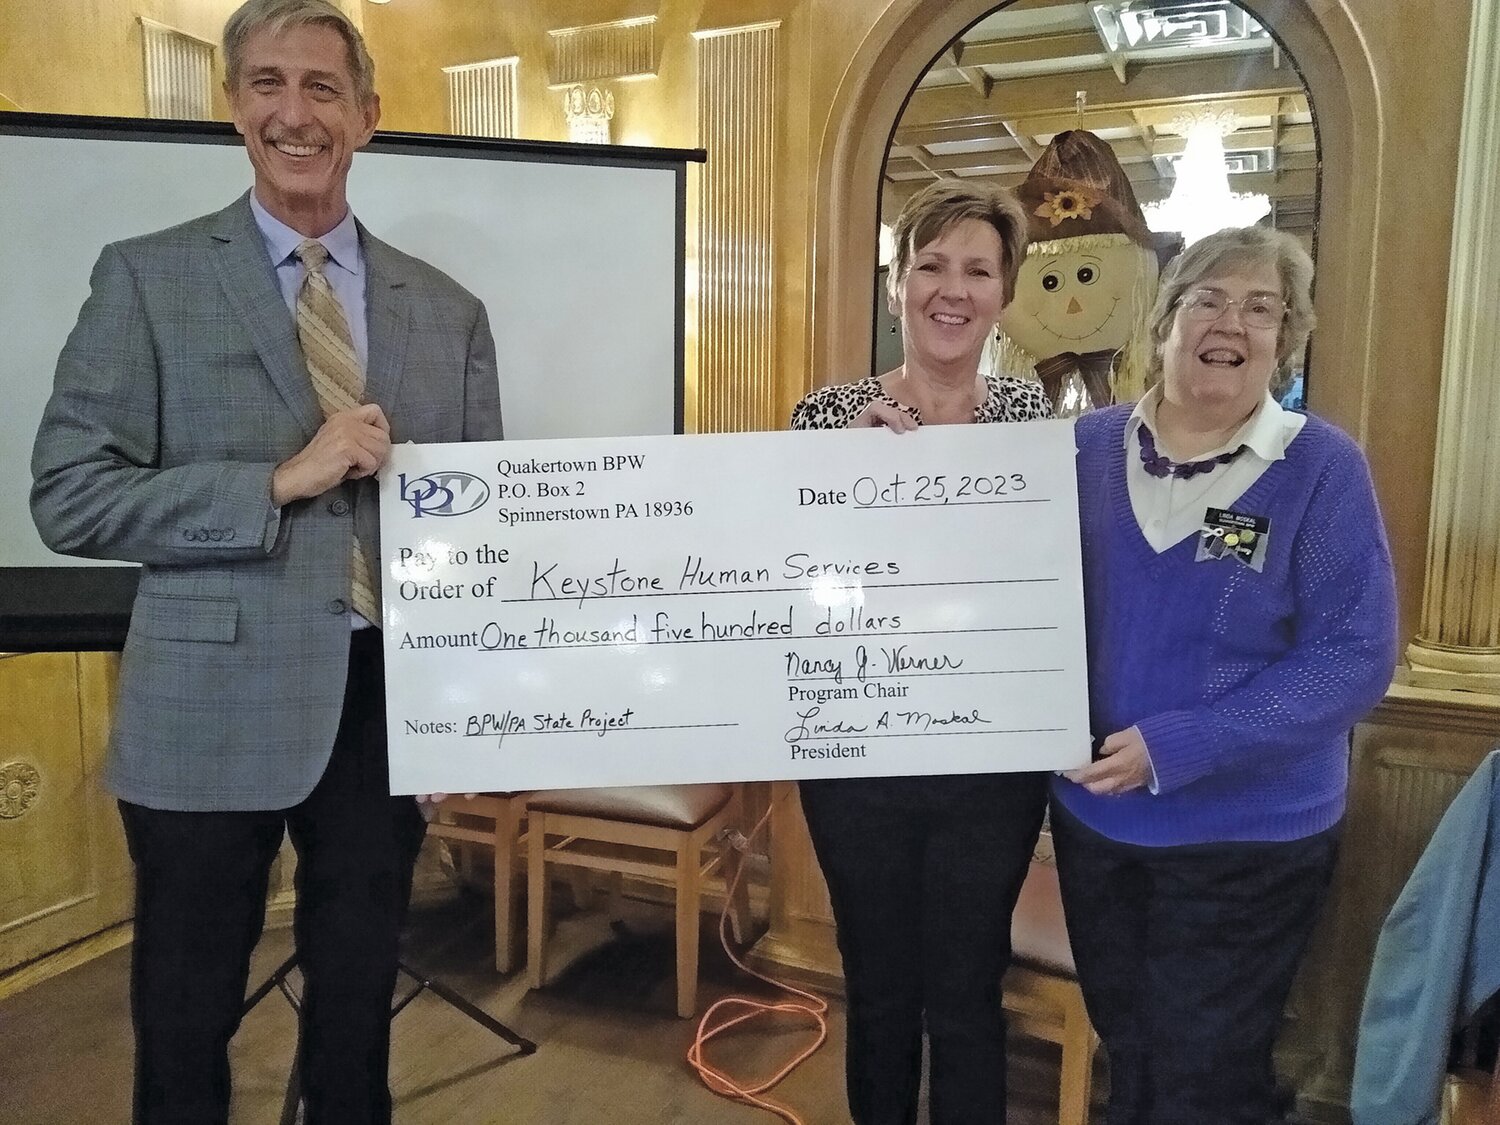 Dave Kunicki, director of intellectual disability services, is presented a check for $1,500 by Quakertown BPW Co-Presidents Jeanne Schlicher and Linda Moskal.